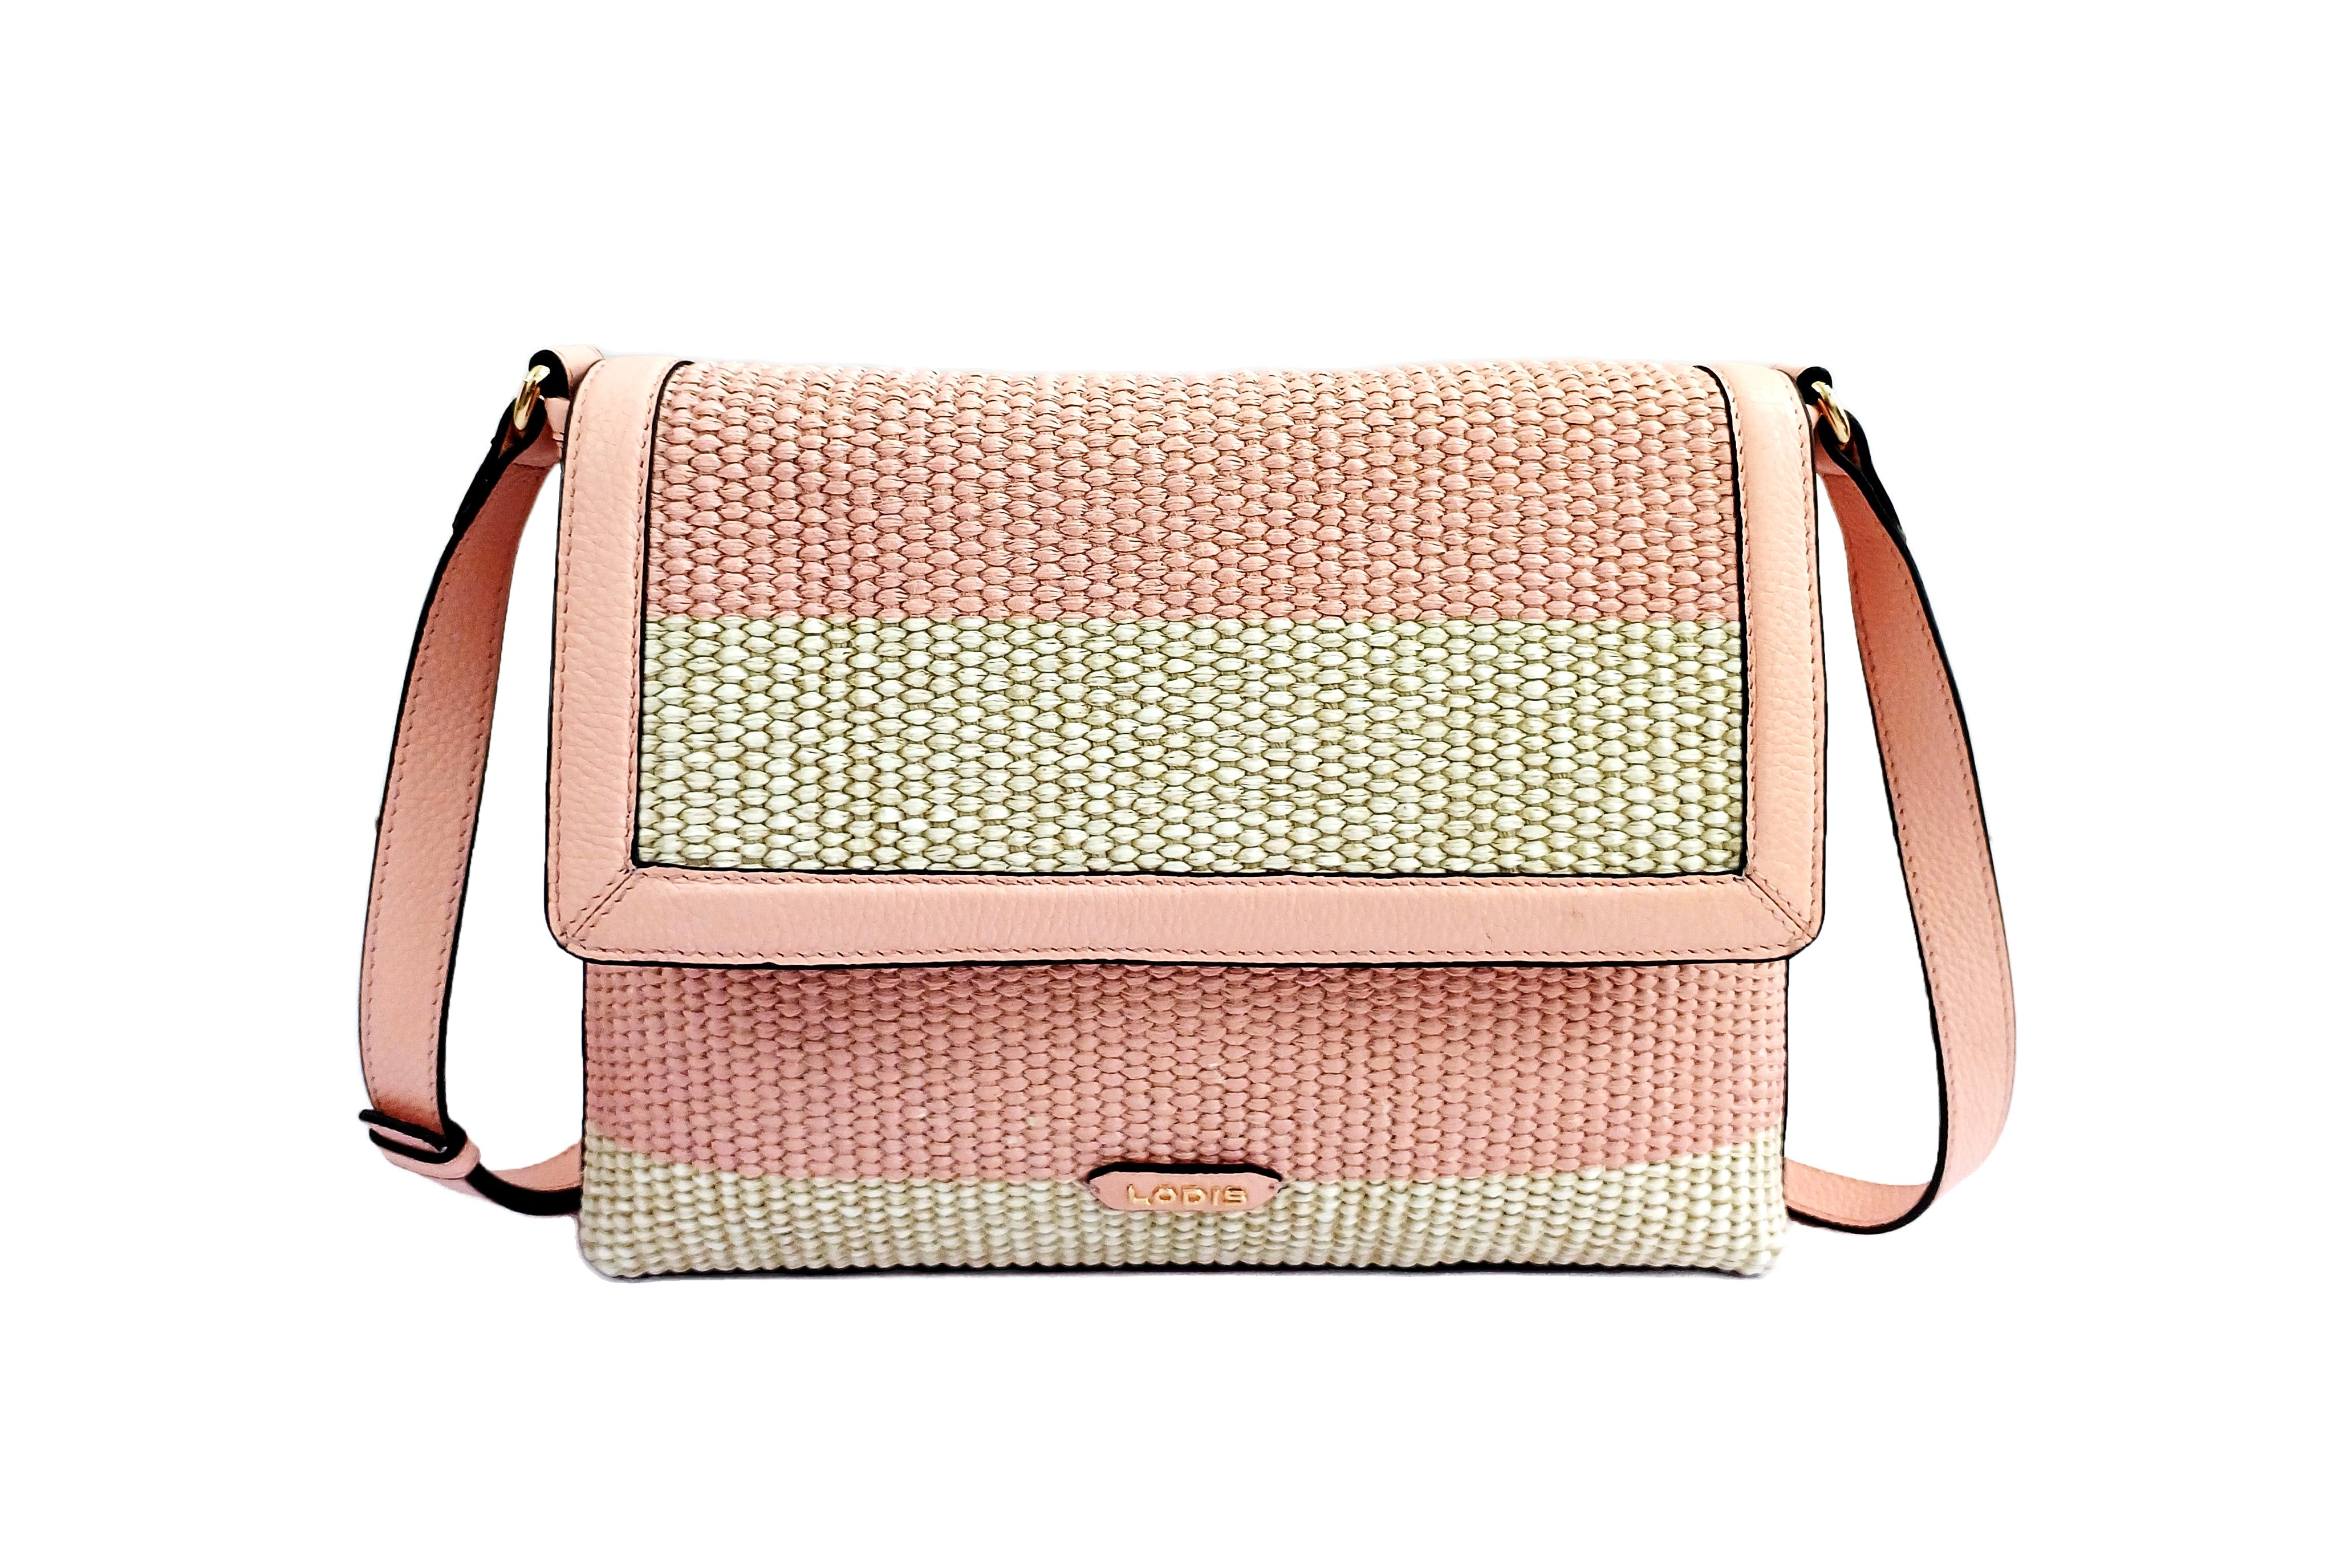 Shop Now&Upgrade Your Style With  Cabana Crossbody | Lodis